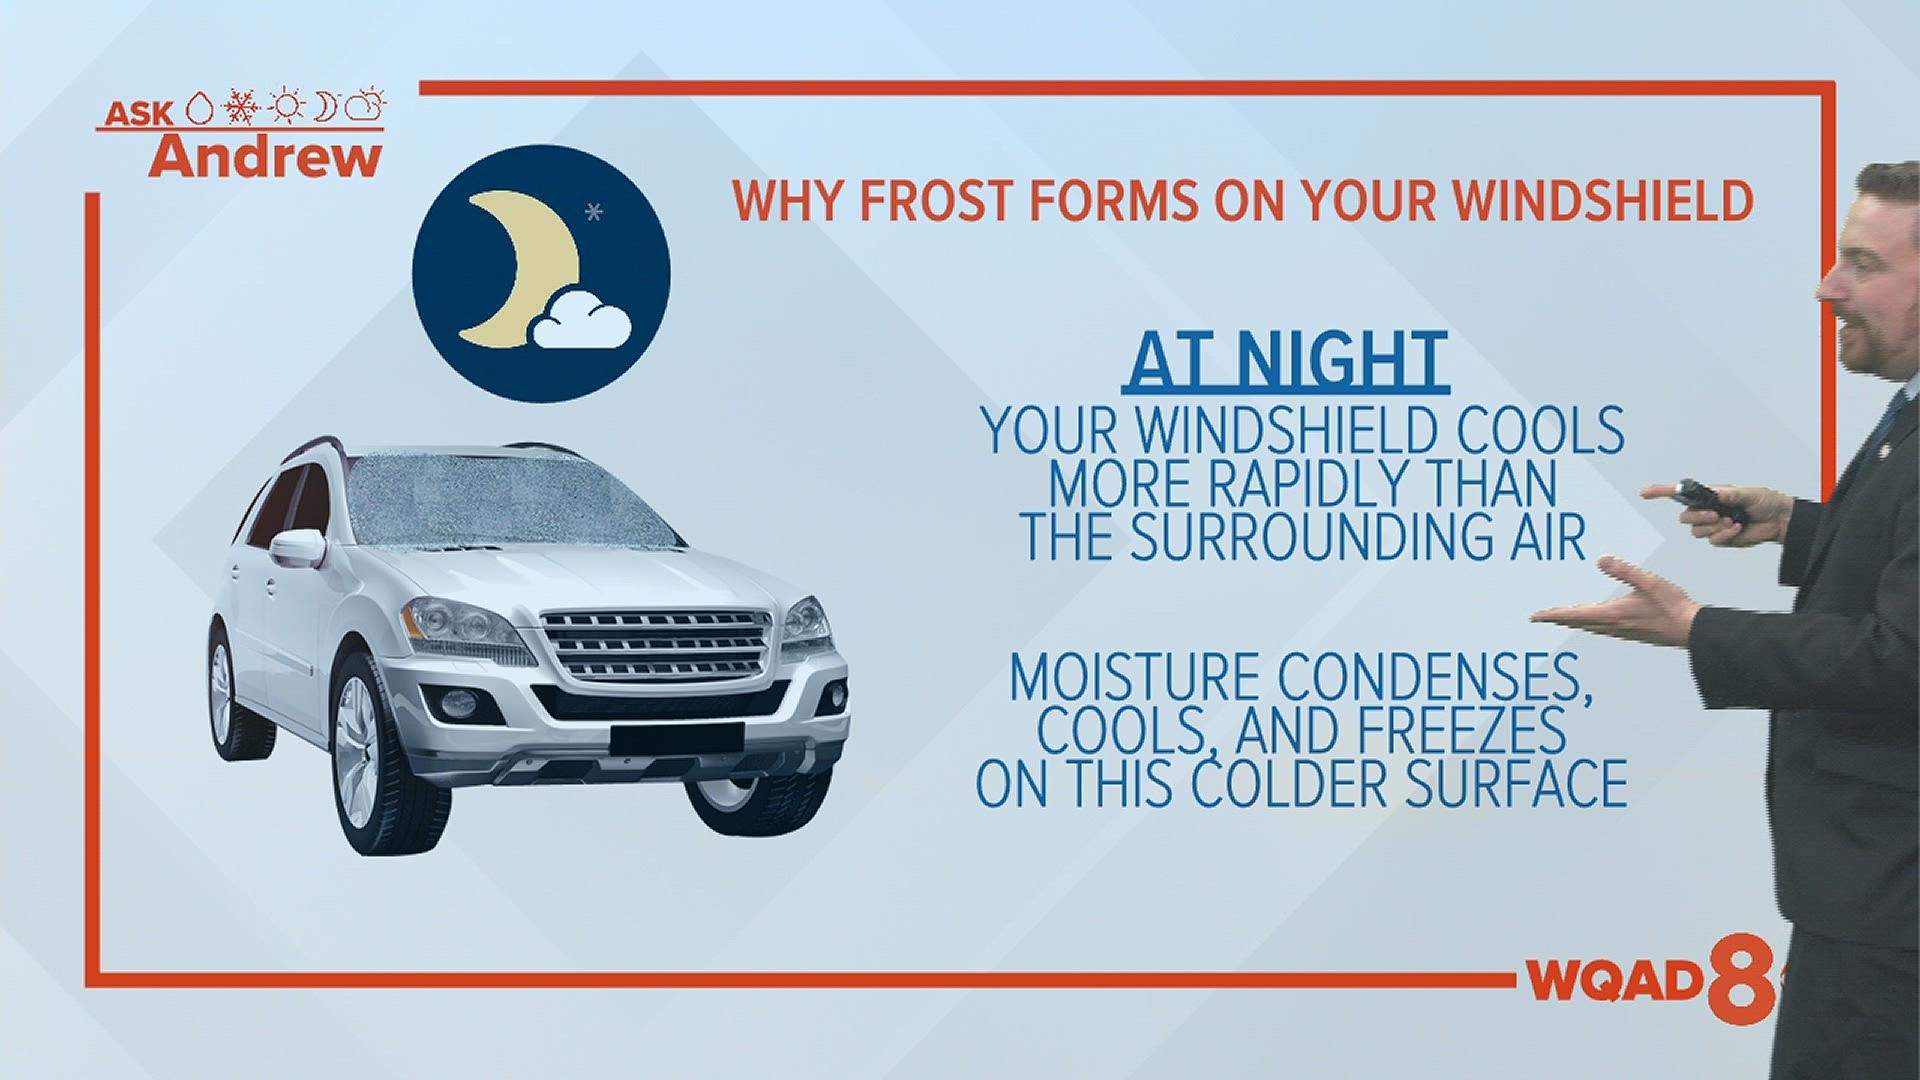 Why does frost form on a windshield? How can I prevent it?